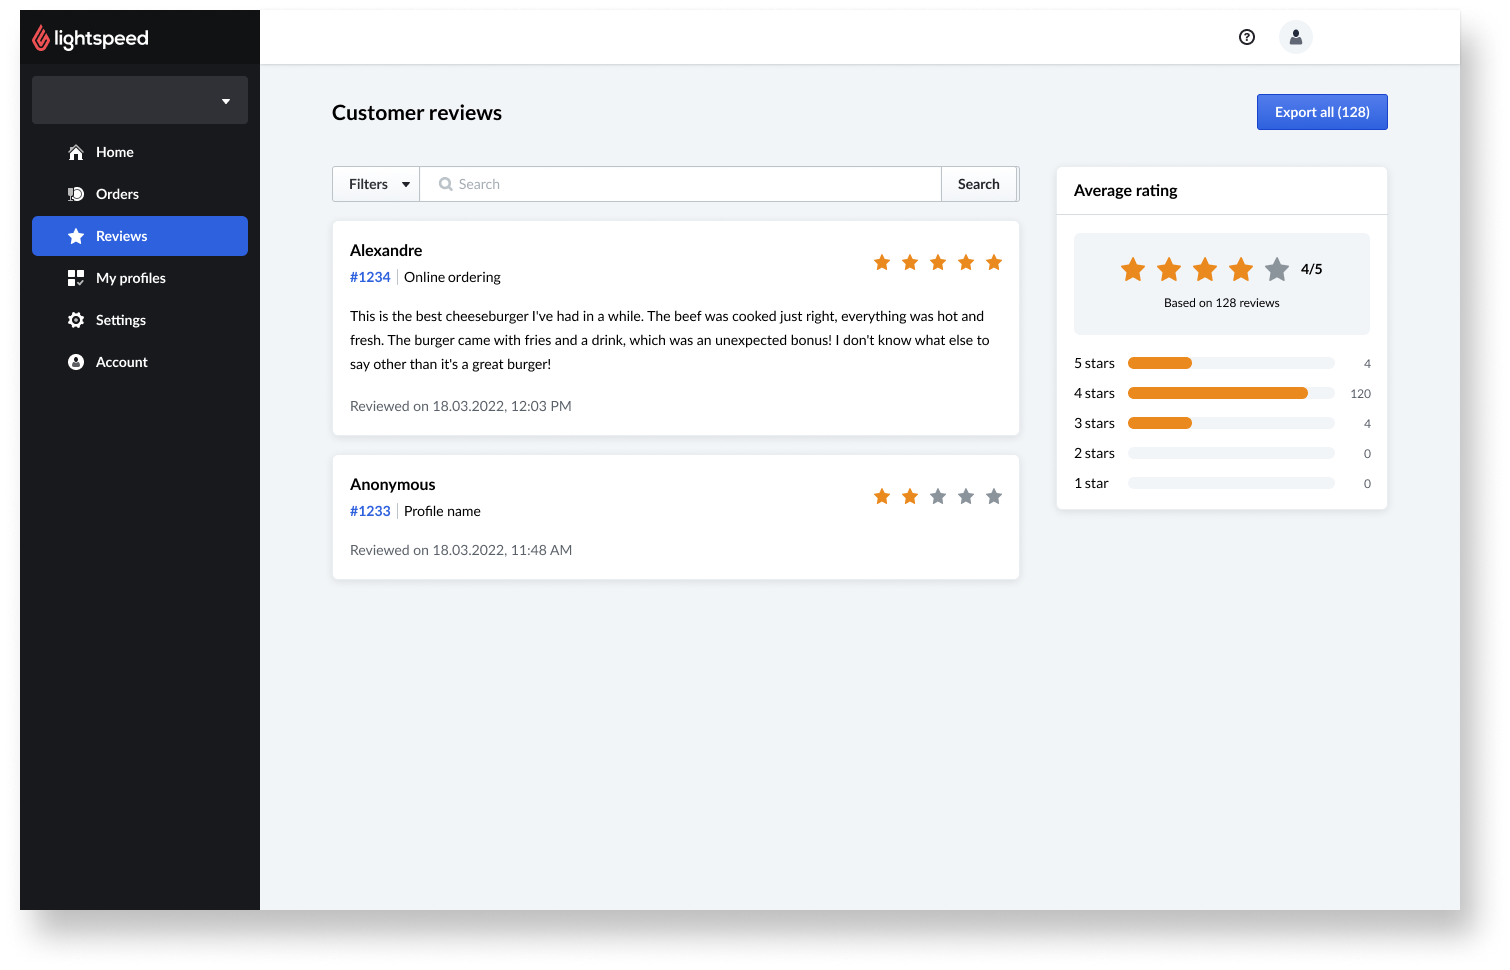 Order Anywhere reviews page with a couple of example reviews.